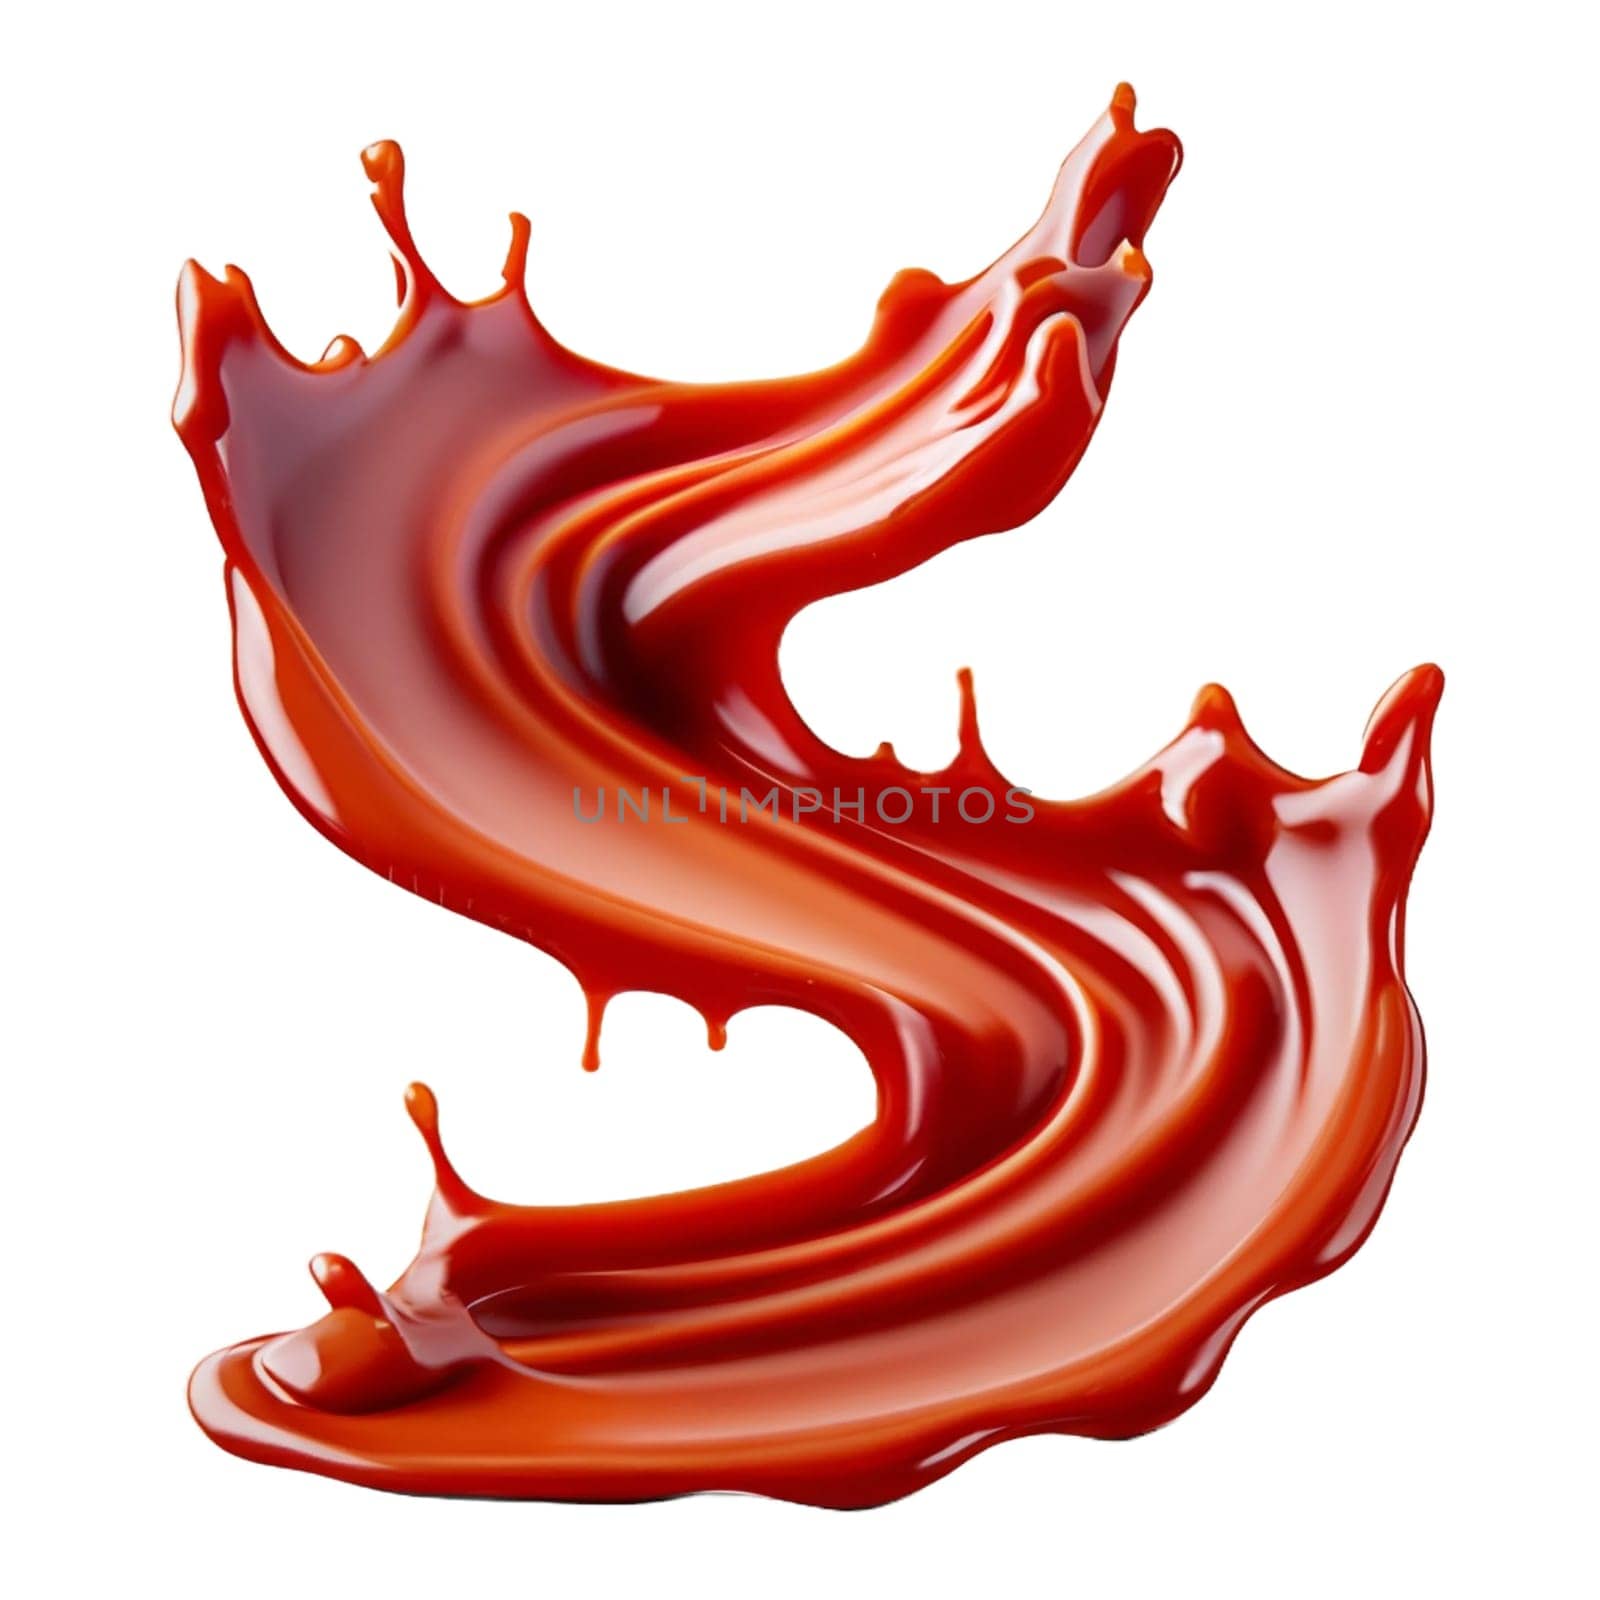 A splash of red thick liquid. 3d illustration, 3d rendering. png image. Red ketchup splashes isolated on white background, tomato pure texture. High quality image